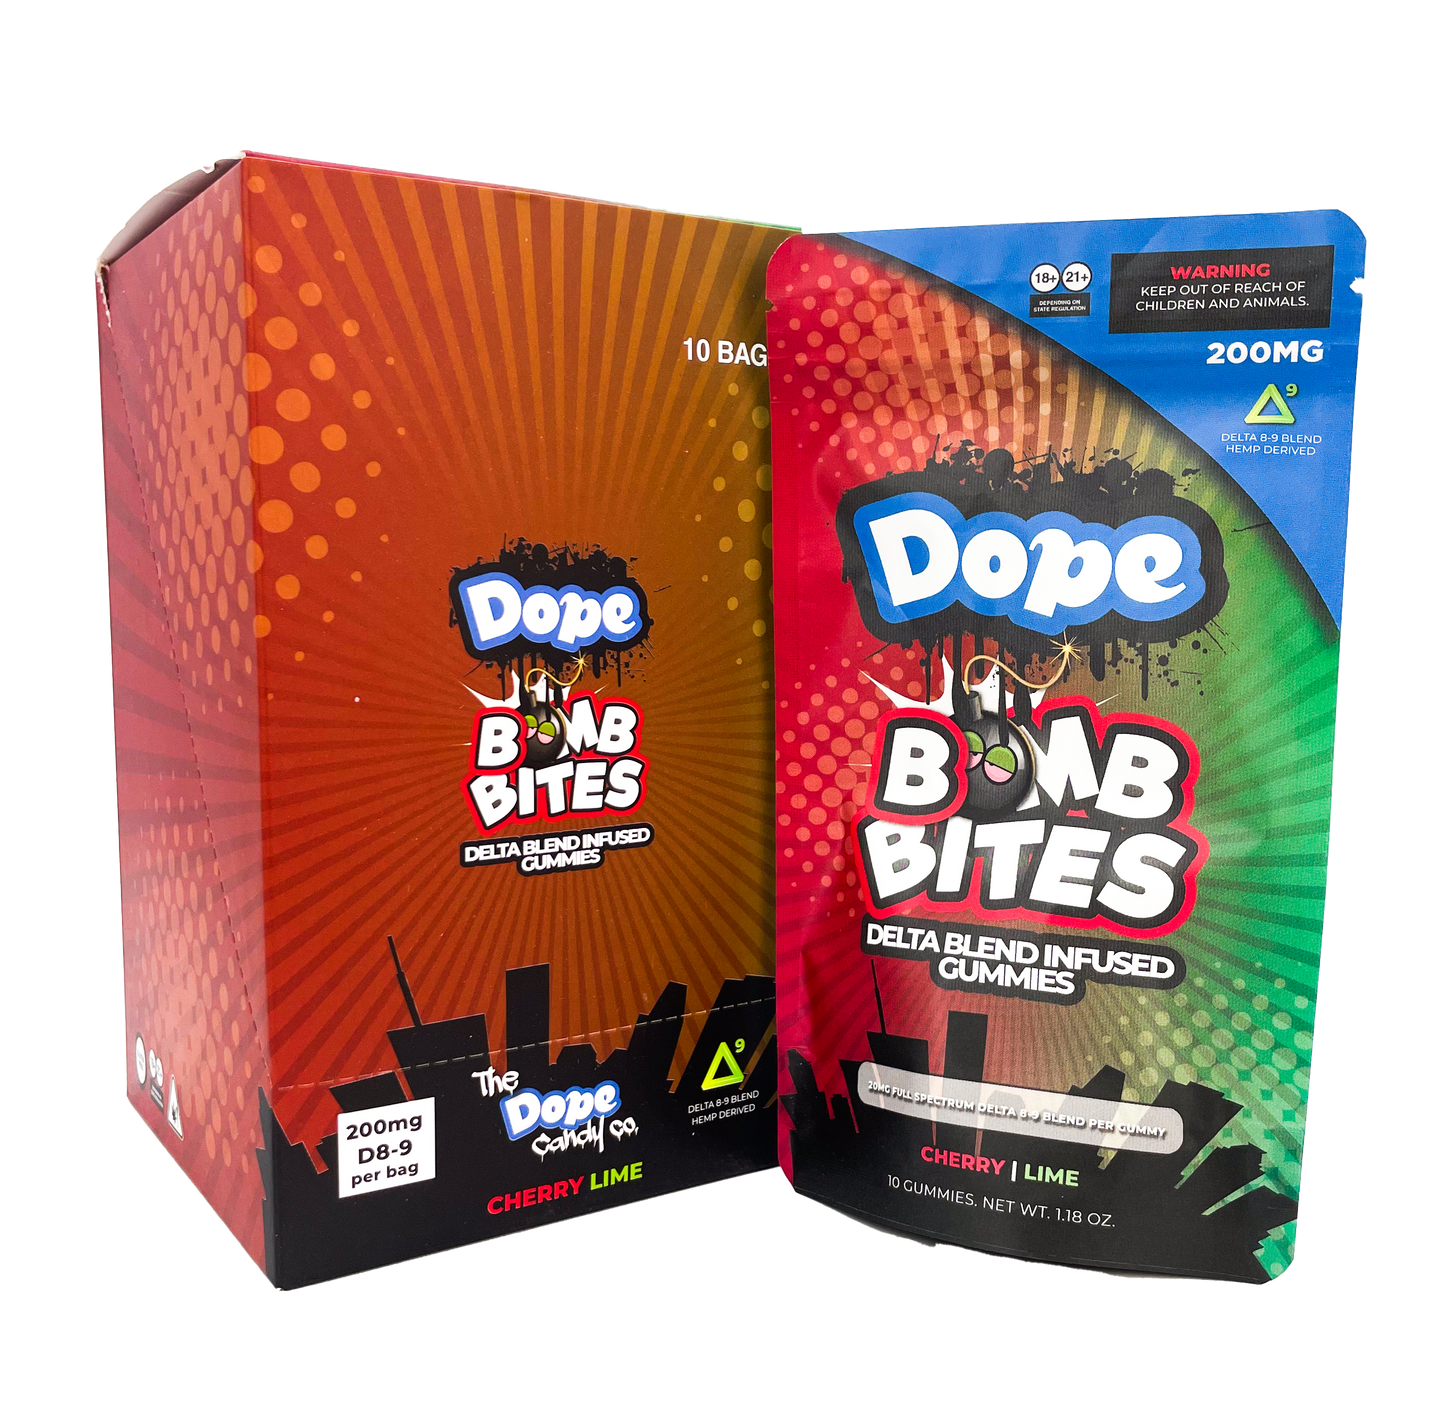 Dope Candy Co - Bomb Bites D9 + D8 10pk Display